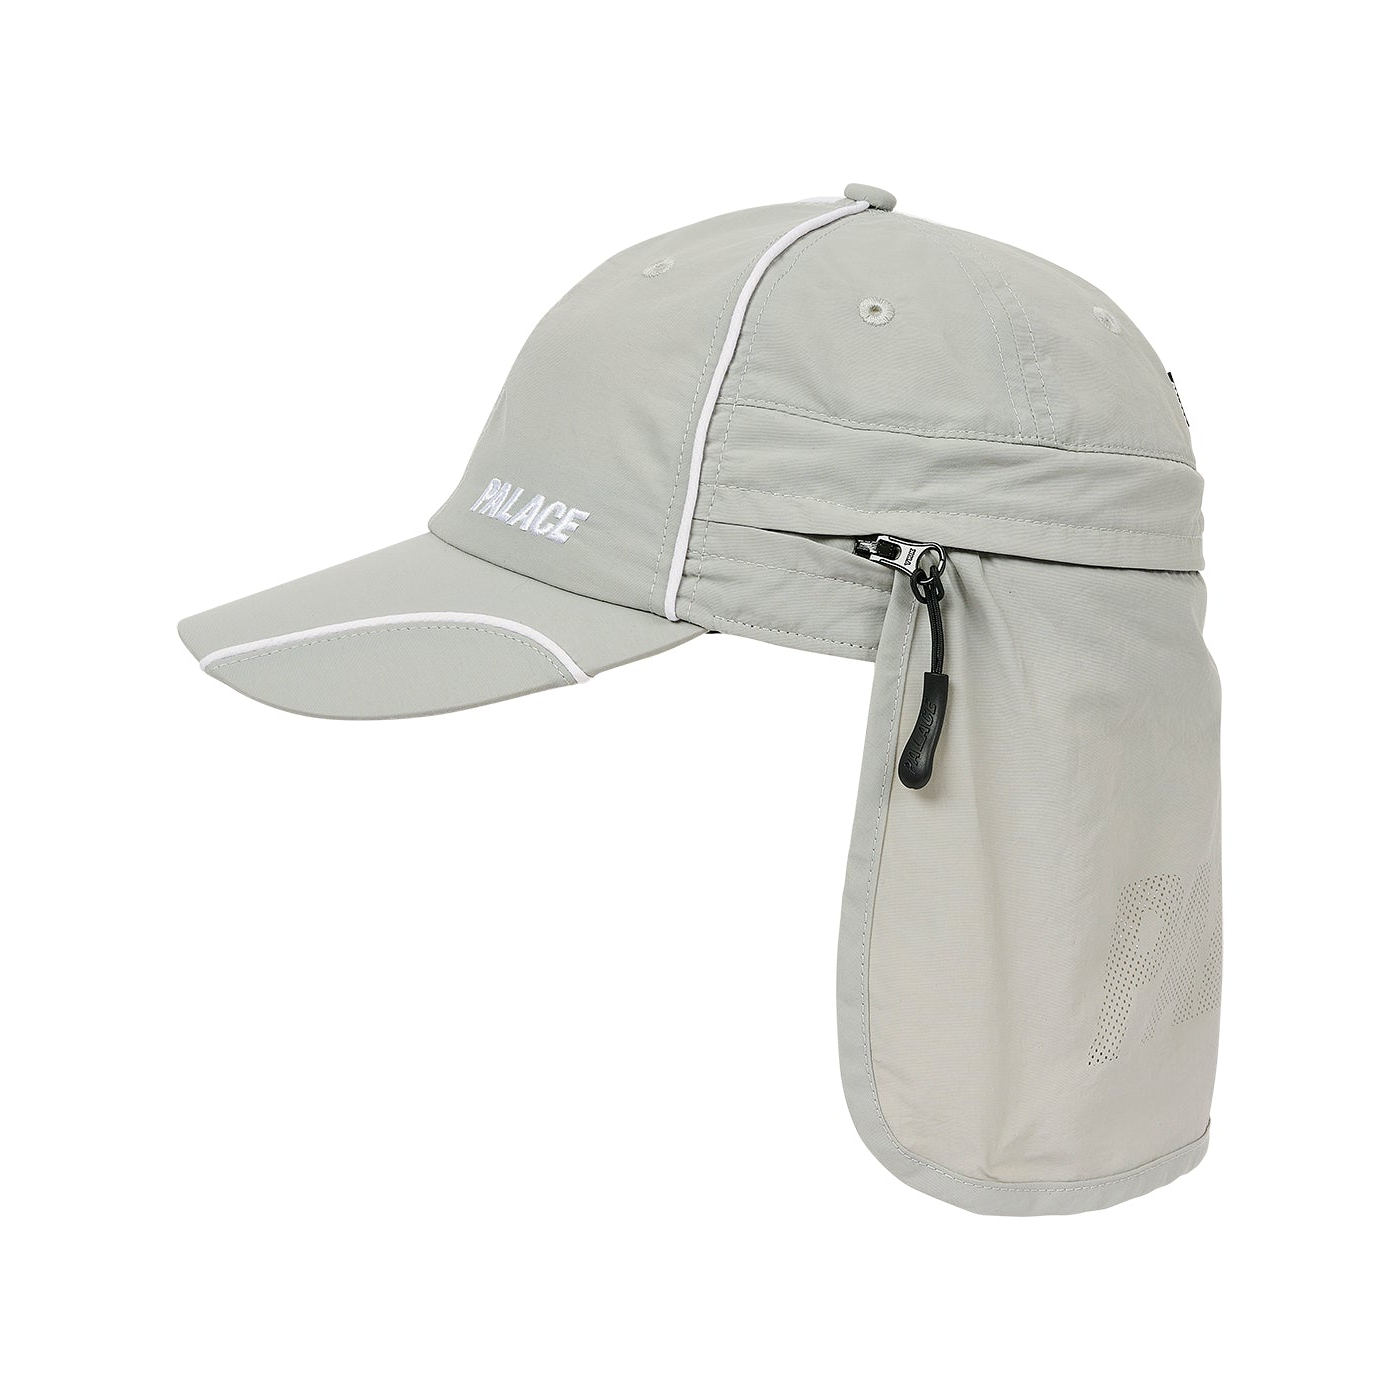 Thumbnail FONT ZIP SHELL NECK SAVER 6-PANEL GREY one color